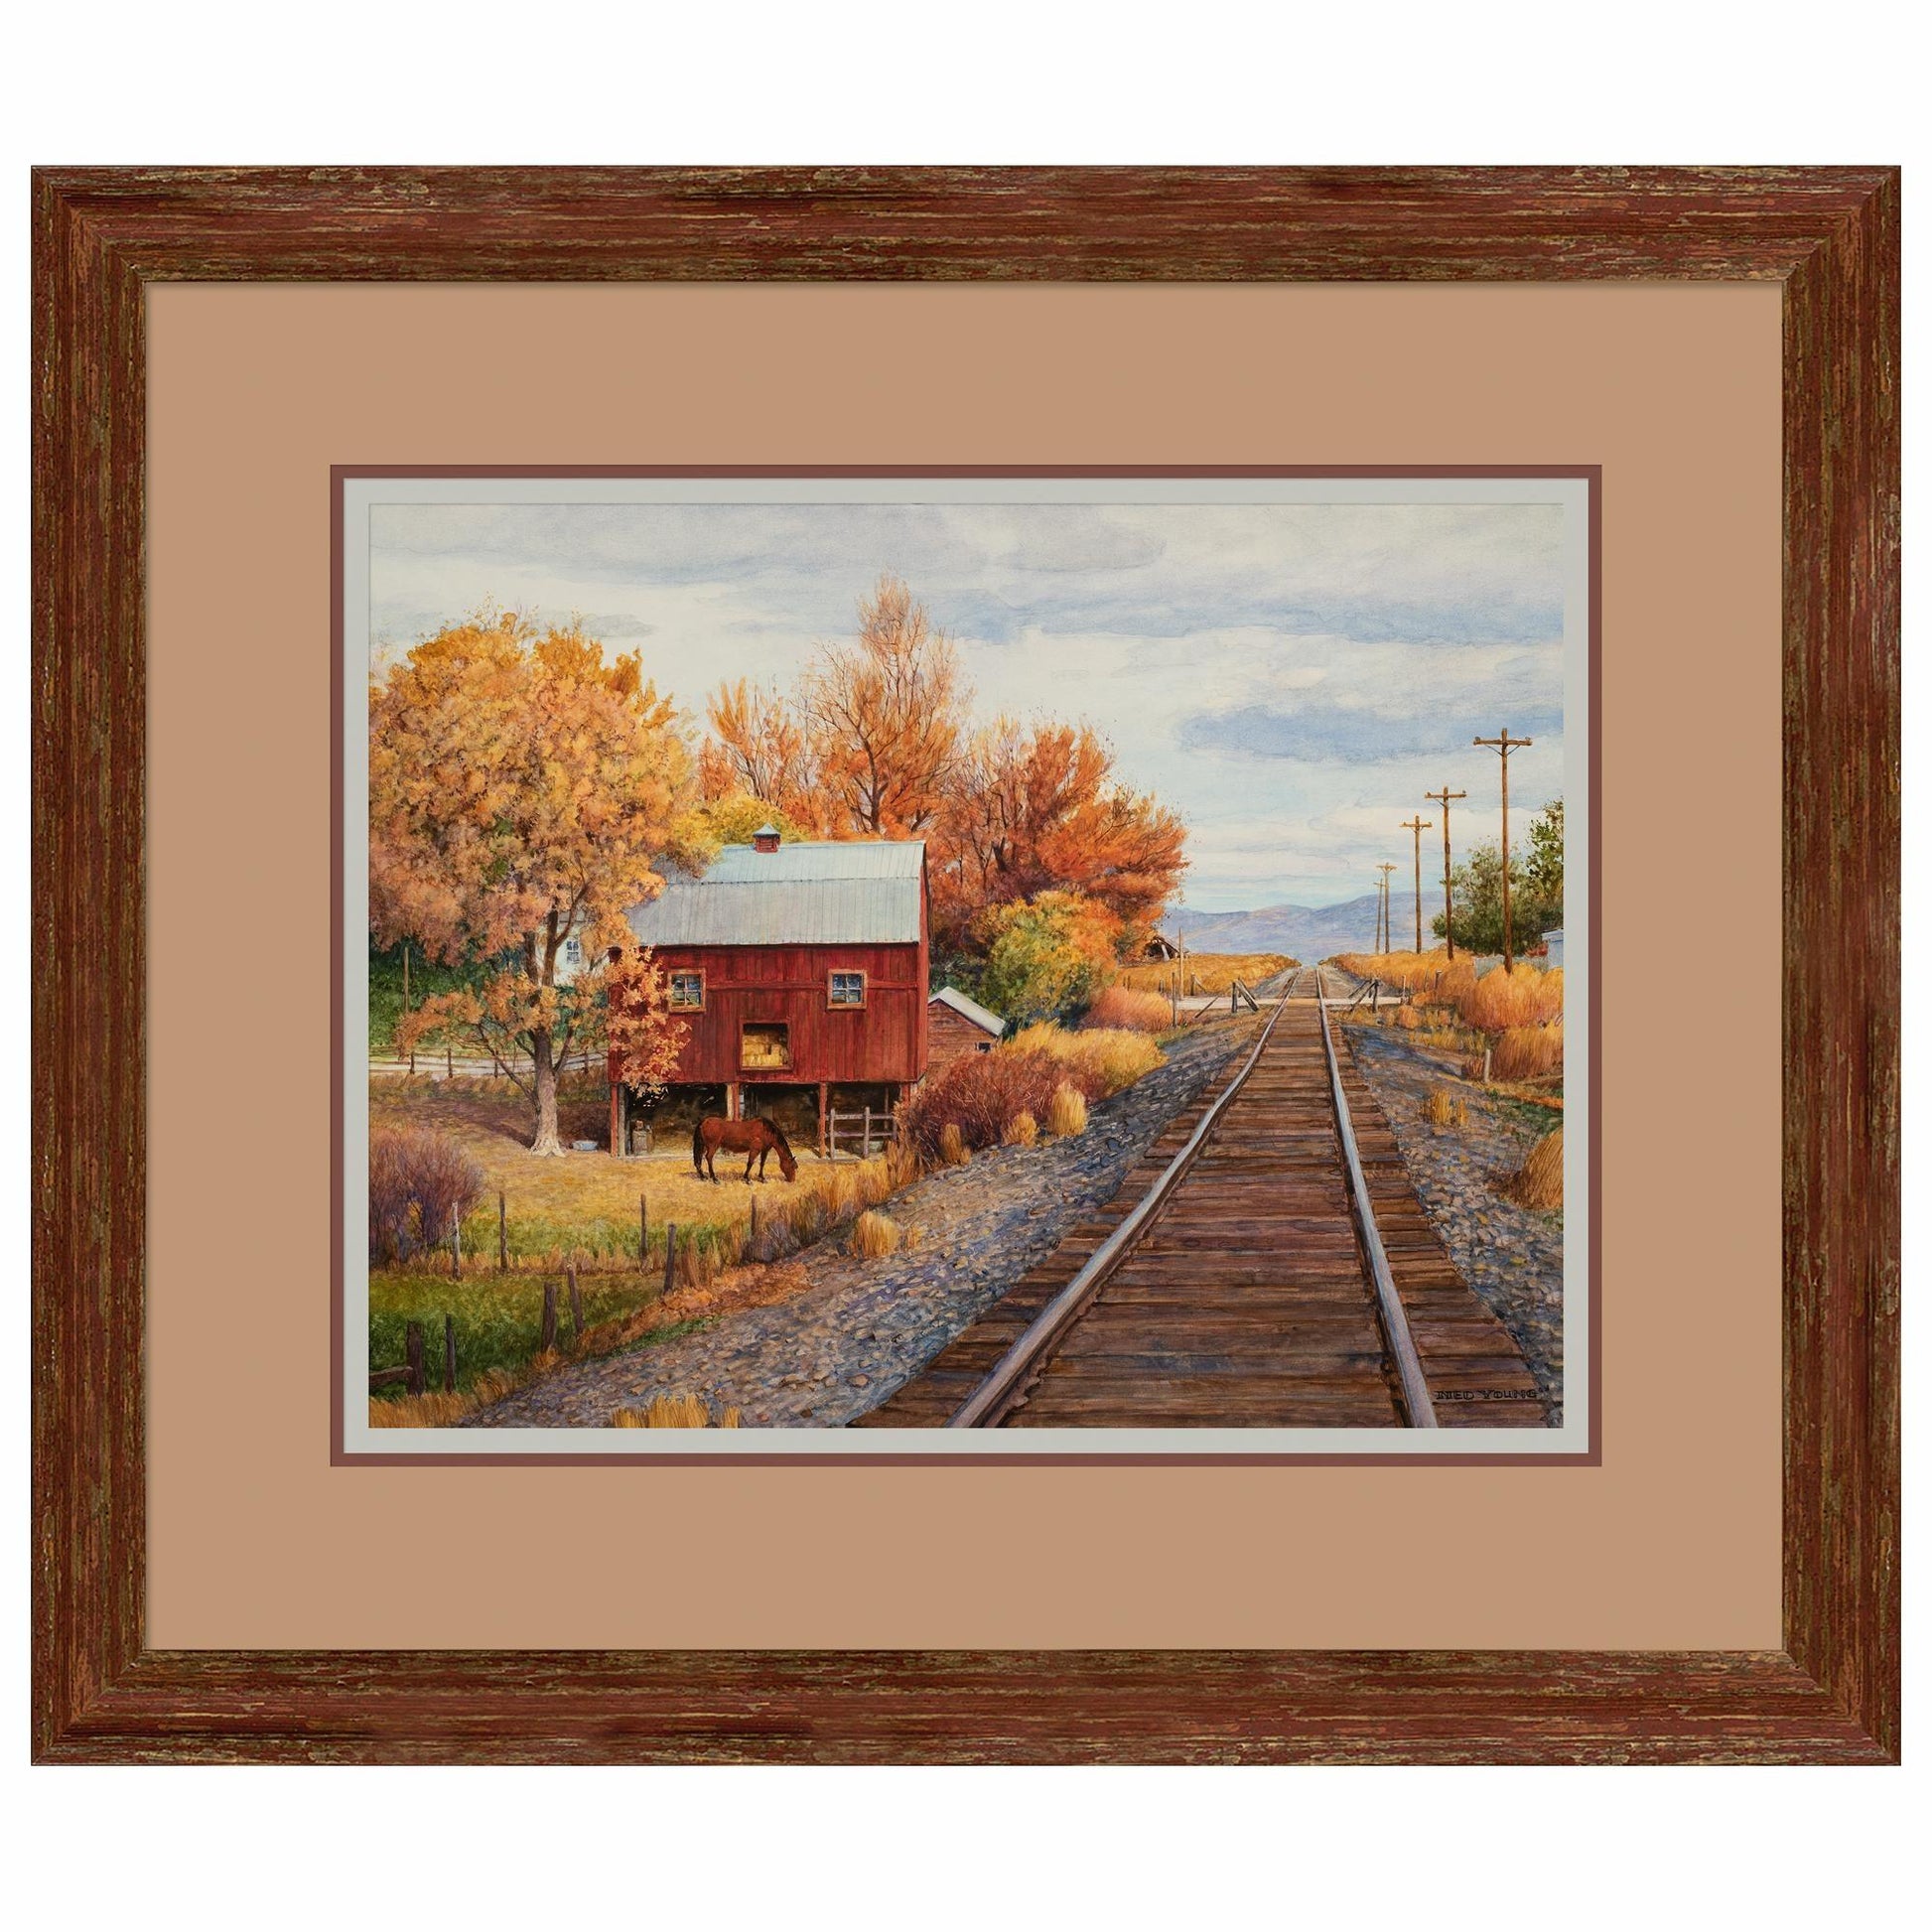 beside-the-crossing-framed-print-ned-young-F970075096.jpg